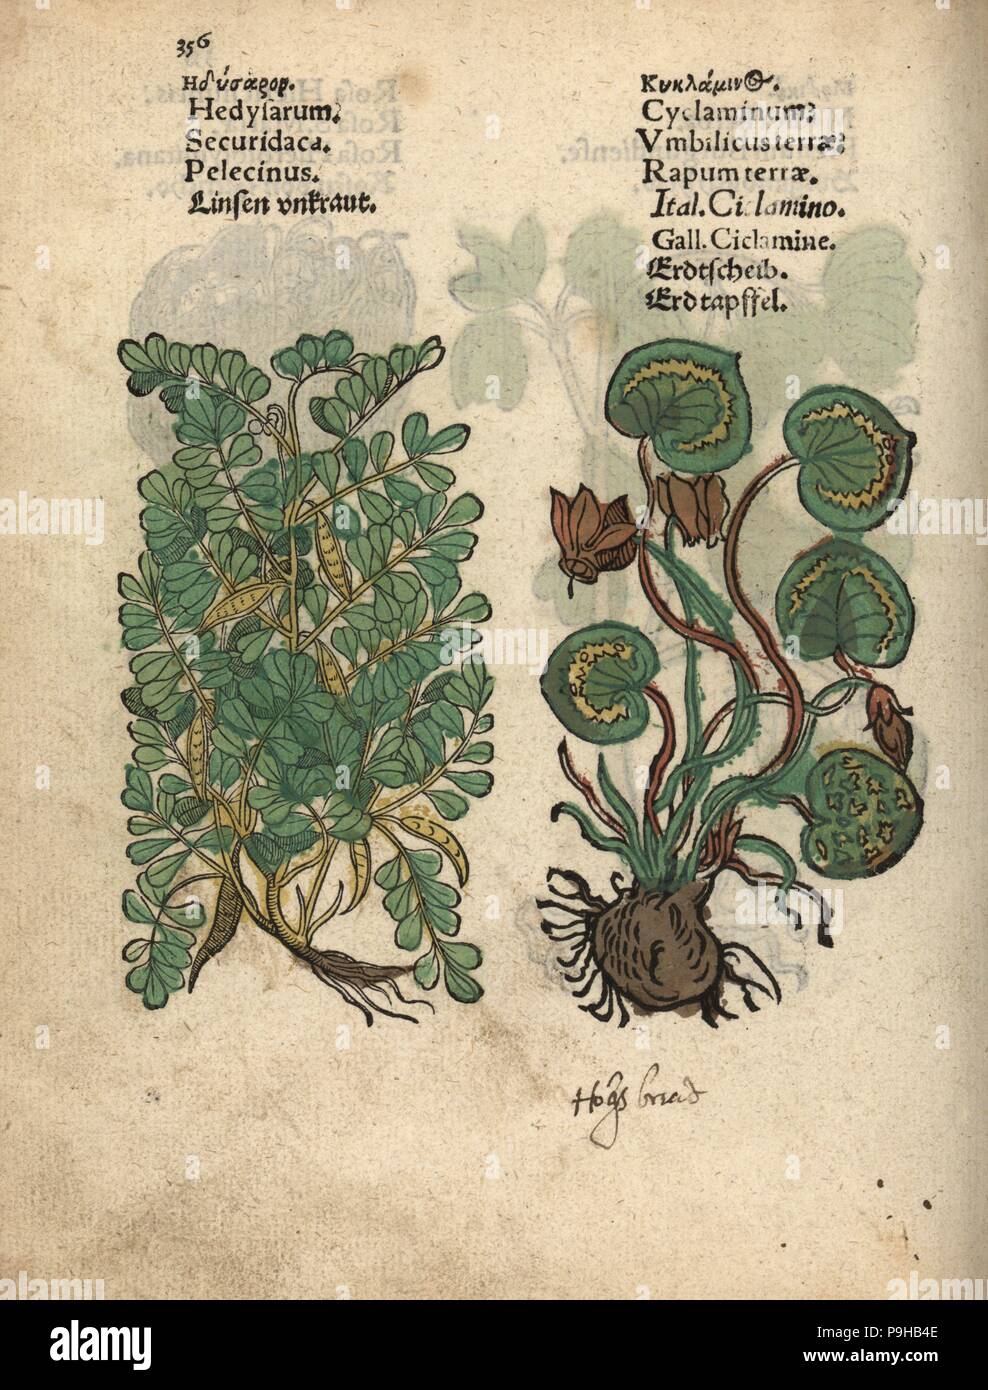 Crownvetch, Securigera securidaca, and Greek cyclamen, Cyclamen graecum. Handcoloured woodblock engraving of a botanical illustration from Adam Lonicer's Krauterbuch, or Herbal, Frankfurt, 1557. This from a 17th century pirate edition or atlas of illustrations only, with captions in Latin, Greek, French, Italian, German, and in English manuscript. Stock Photo